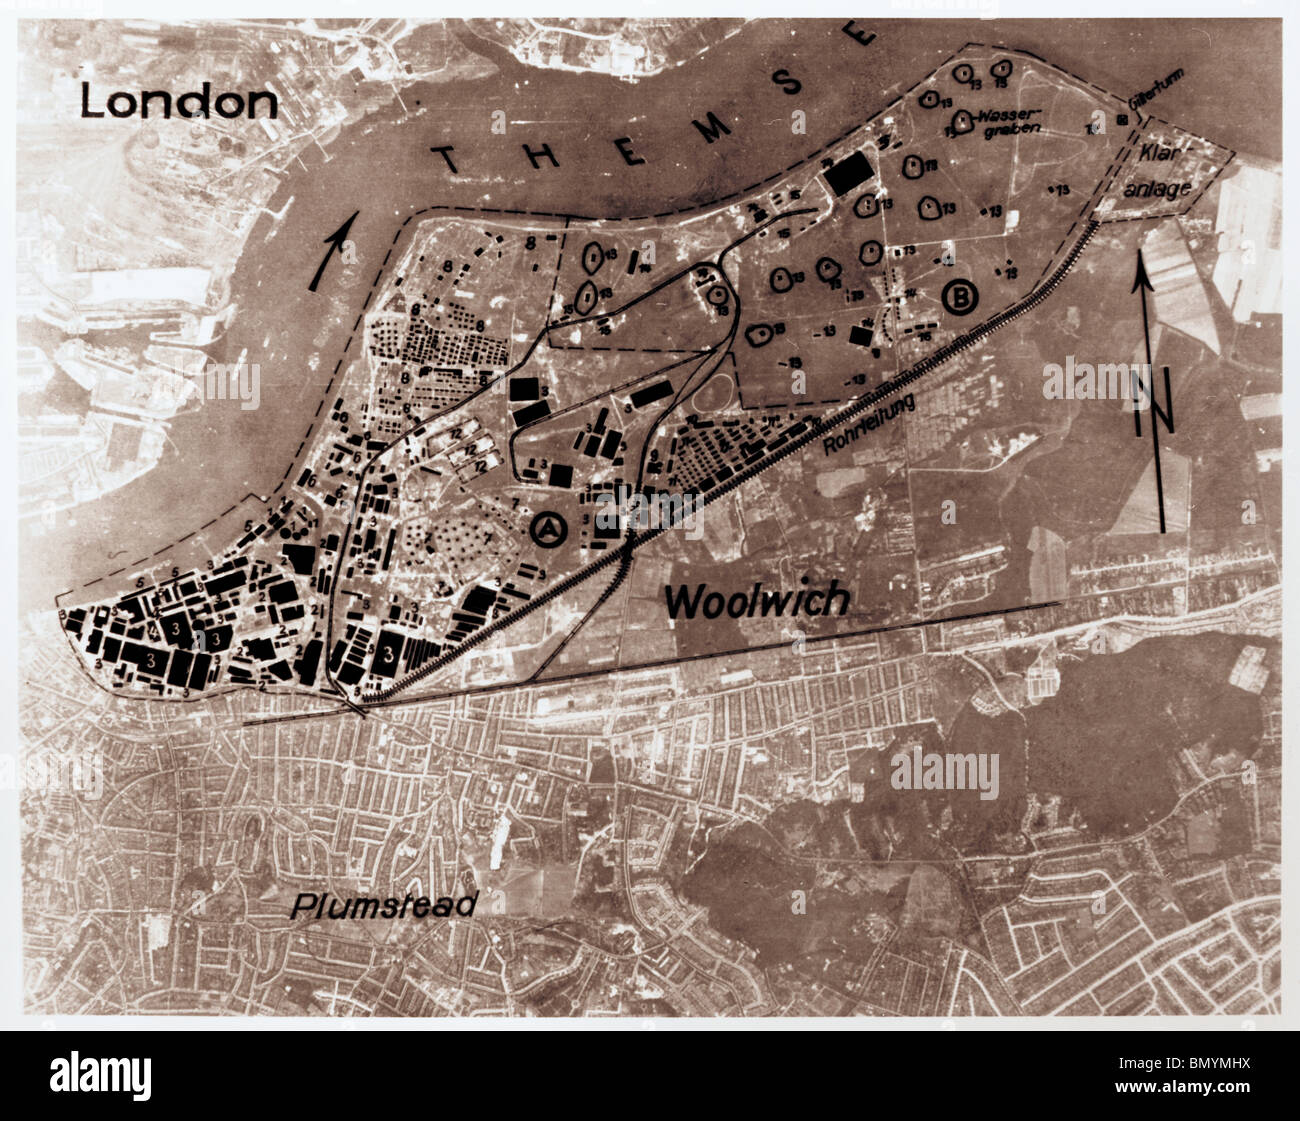 London - Woolwich 4th June 1939 Woolwich Arsenal Luftwaffe Aerial Image Stock Photo